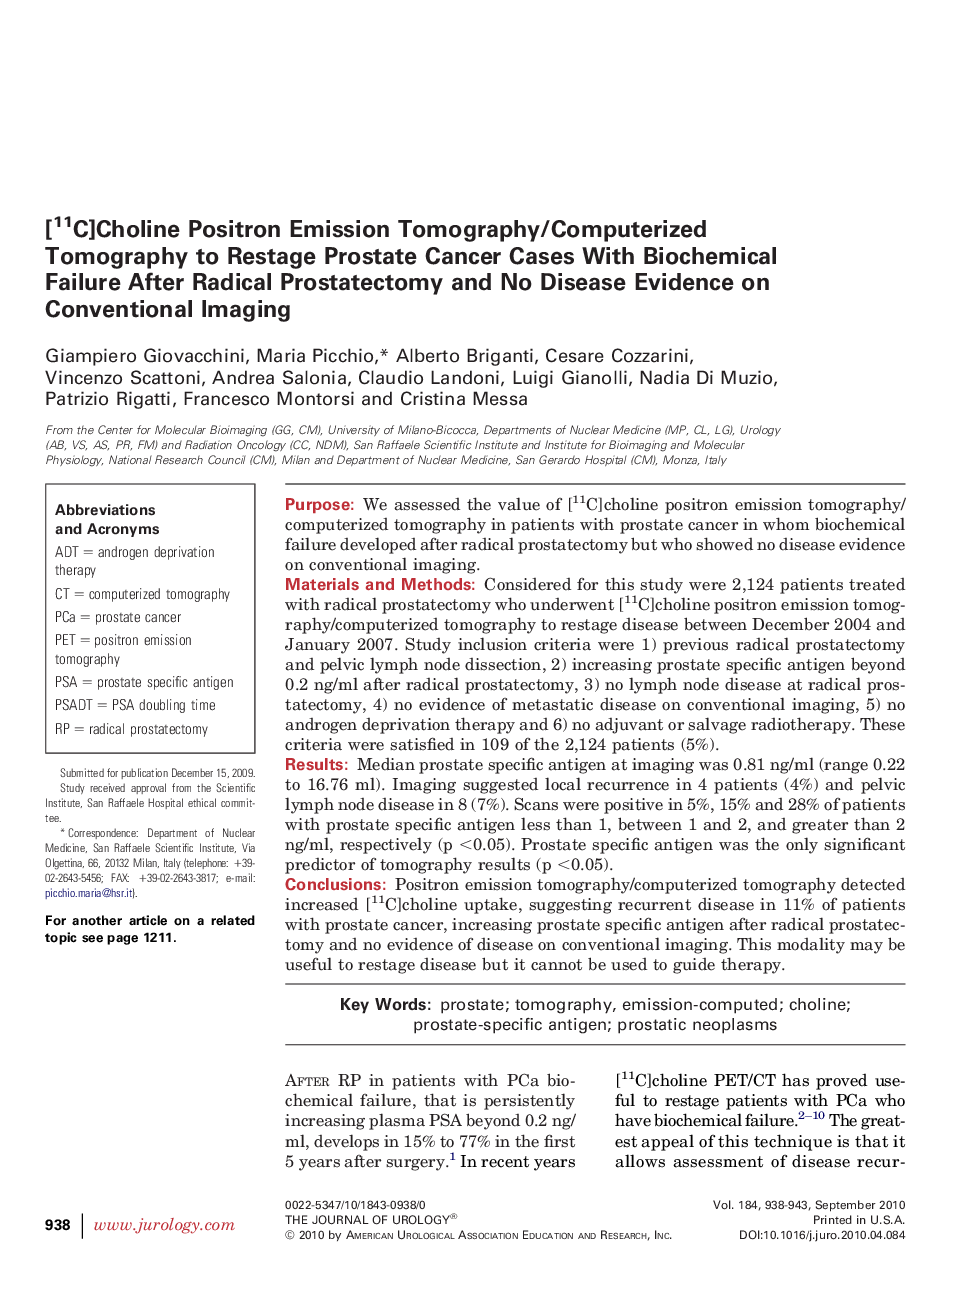 [11C]Choline Positron Emission Tomography/Computerized Tomography to Restage Prostate Cancer Cases With Biochemical Failure After Radical Prostatectomy and No Disease Evidence on Conventional Imaging